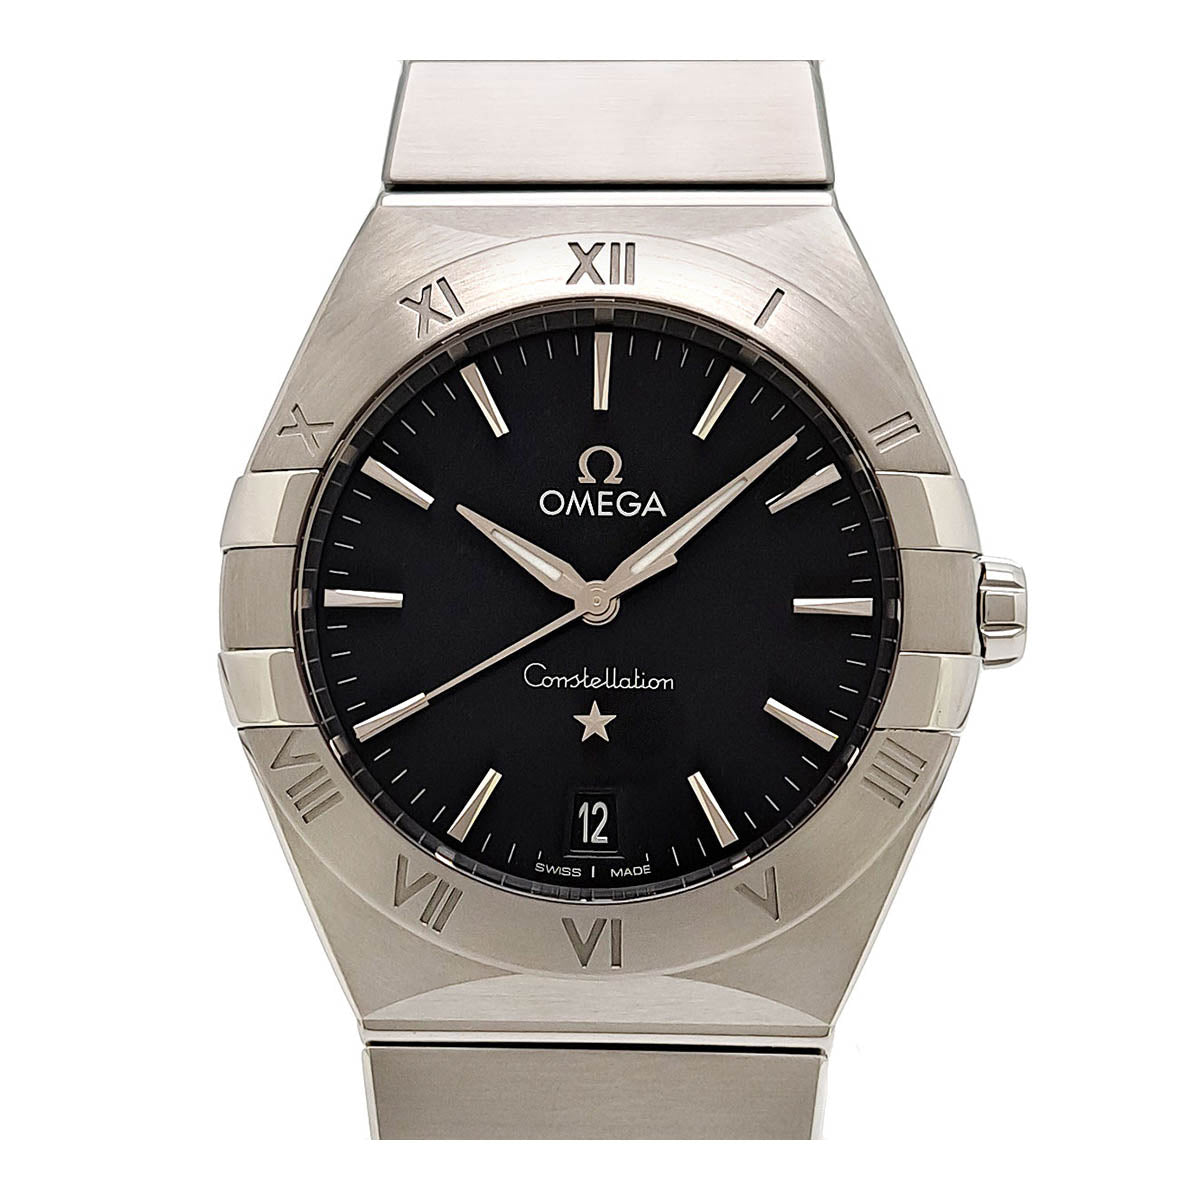 OMEGA Constellation-36mm 131.10.36.60.01.001 Quartz Stainless Steel Men's Watch (Pre-Owned) 131.10.36.60.01.001